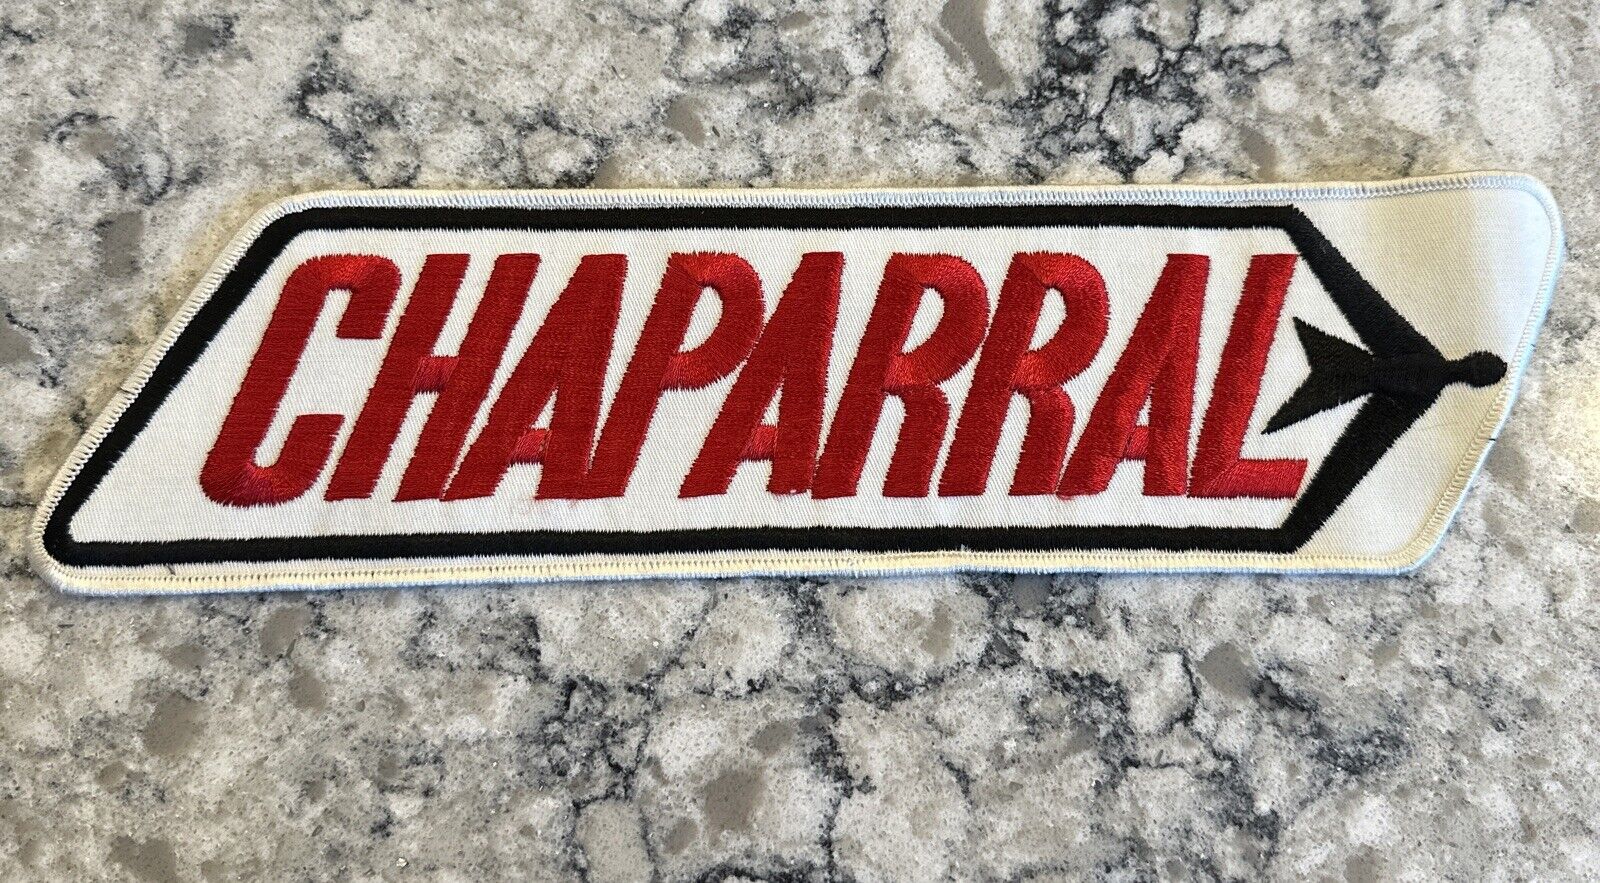 CHAPARRAL SNOWMOBILE JACKET PATCH VTG Large Size Sewn Embroidered